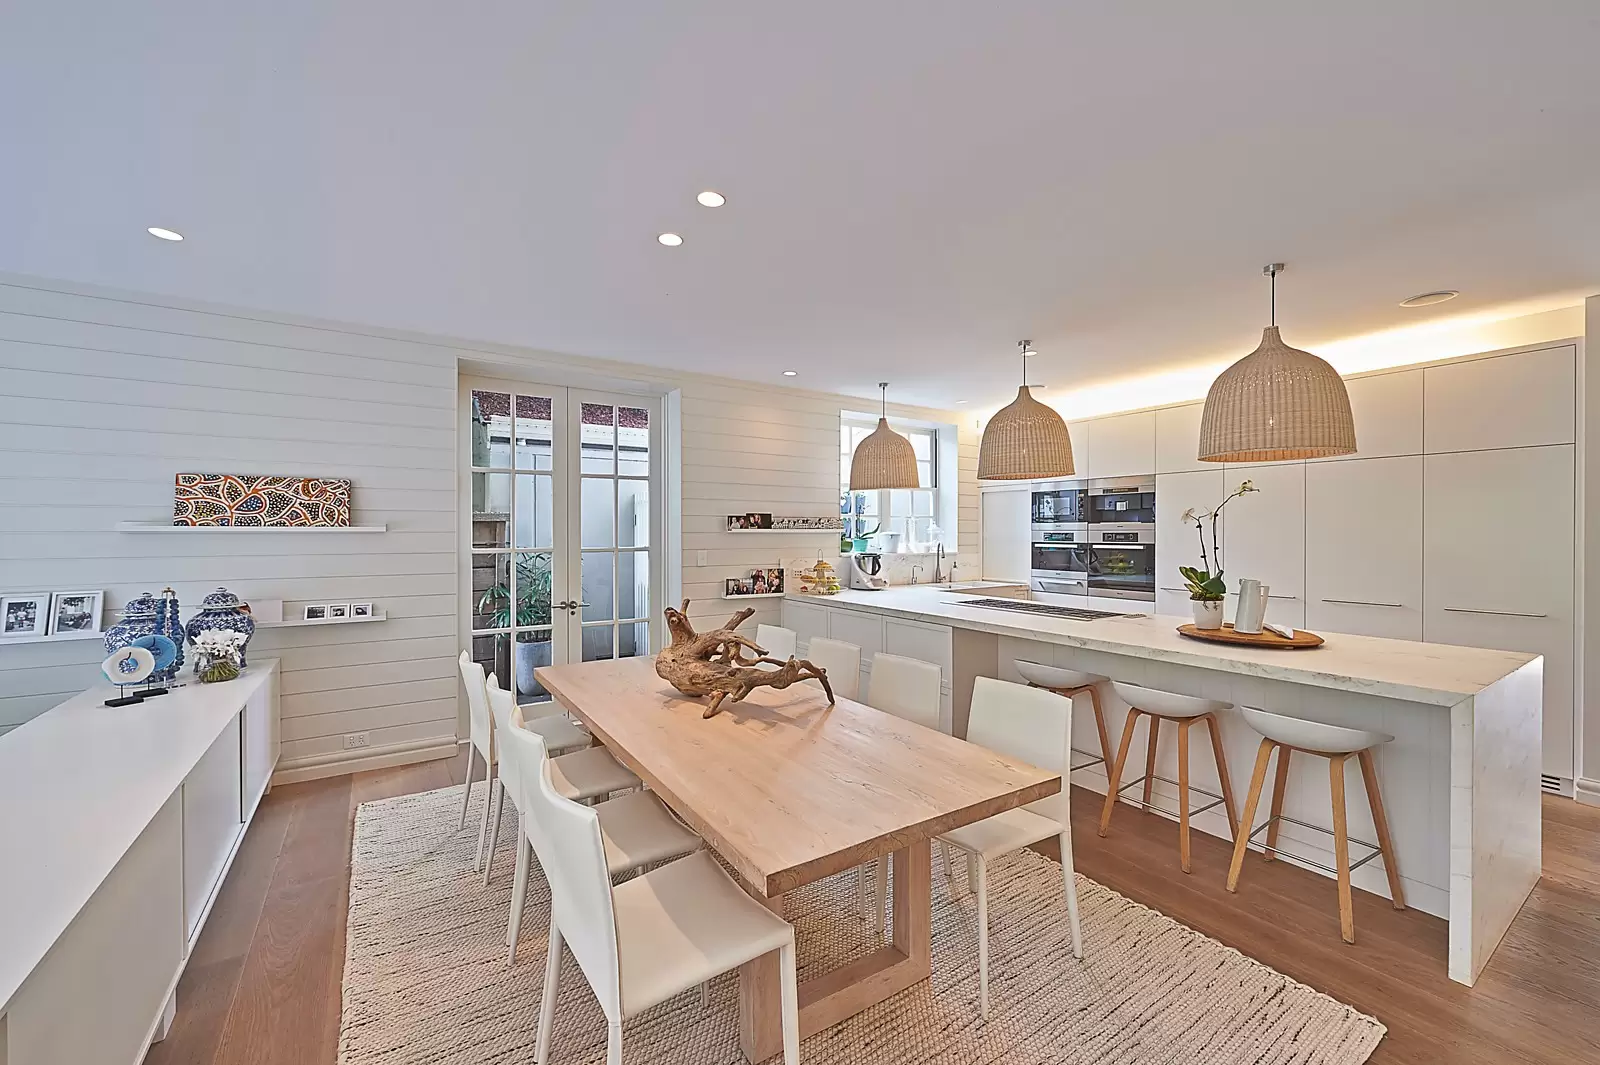 Photo #5: 13 Spicer Street, Woollahra - Sold by Sydney Sotheby's International Realty